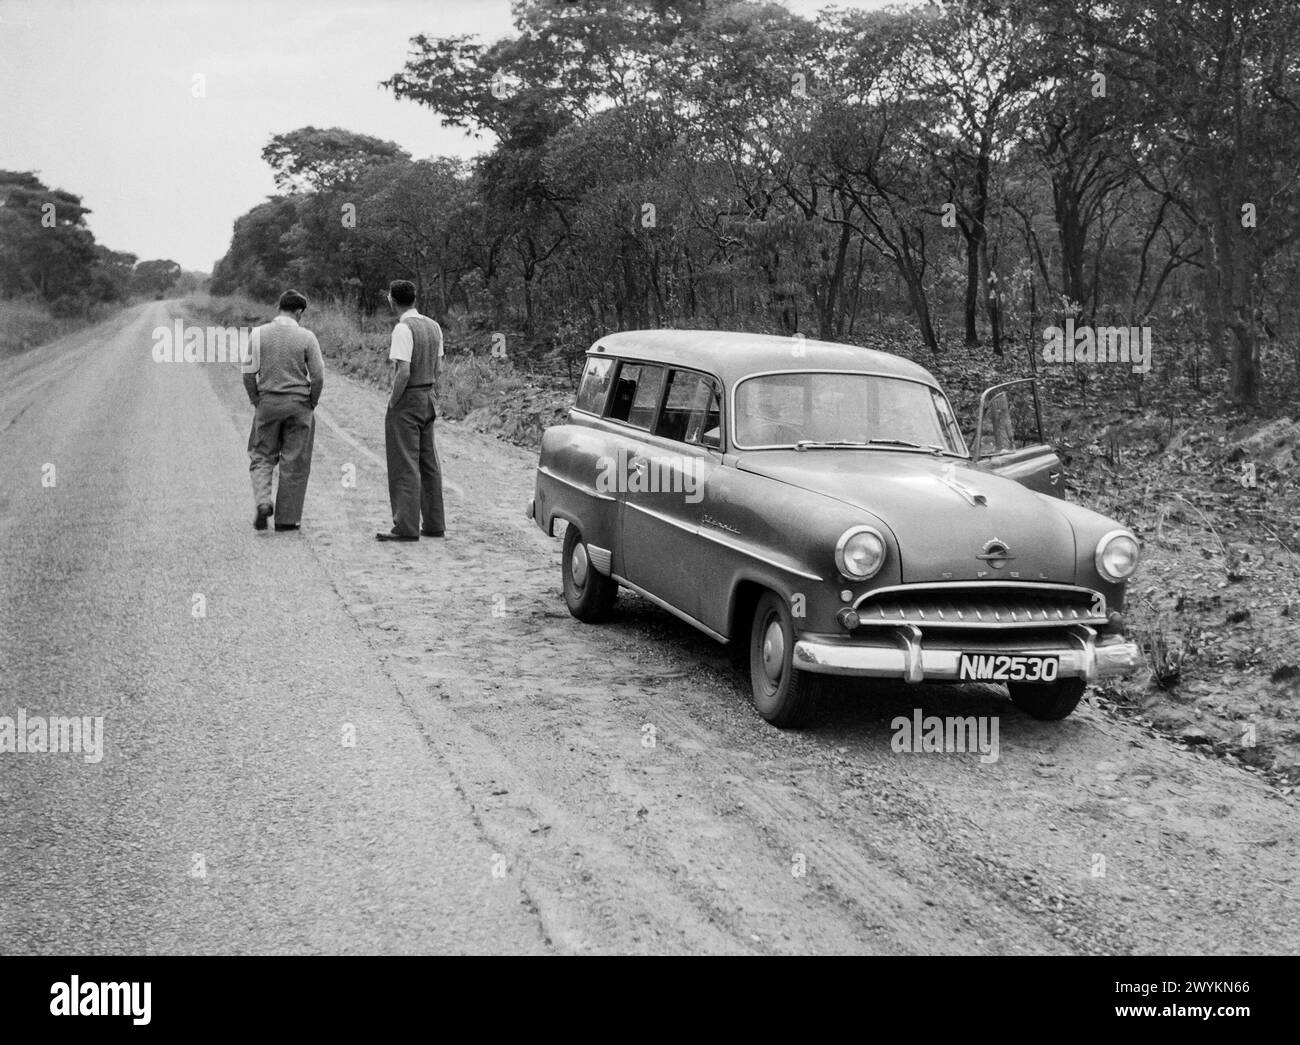 Opel Olympia Rekord CarAvan (1953-57) c1956 on a road in Africa, either Rhodesia (Zimbabwe) or Nothern Rhodesia (Zambia) Stock Photo